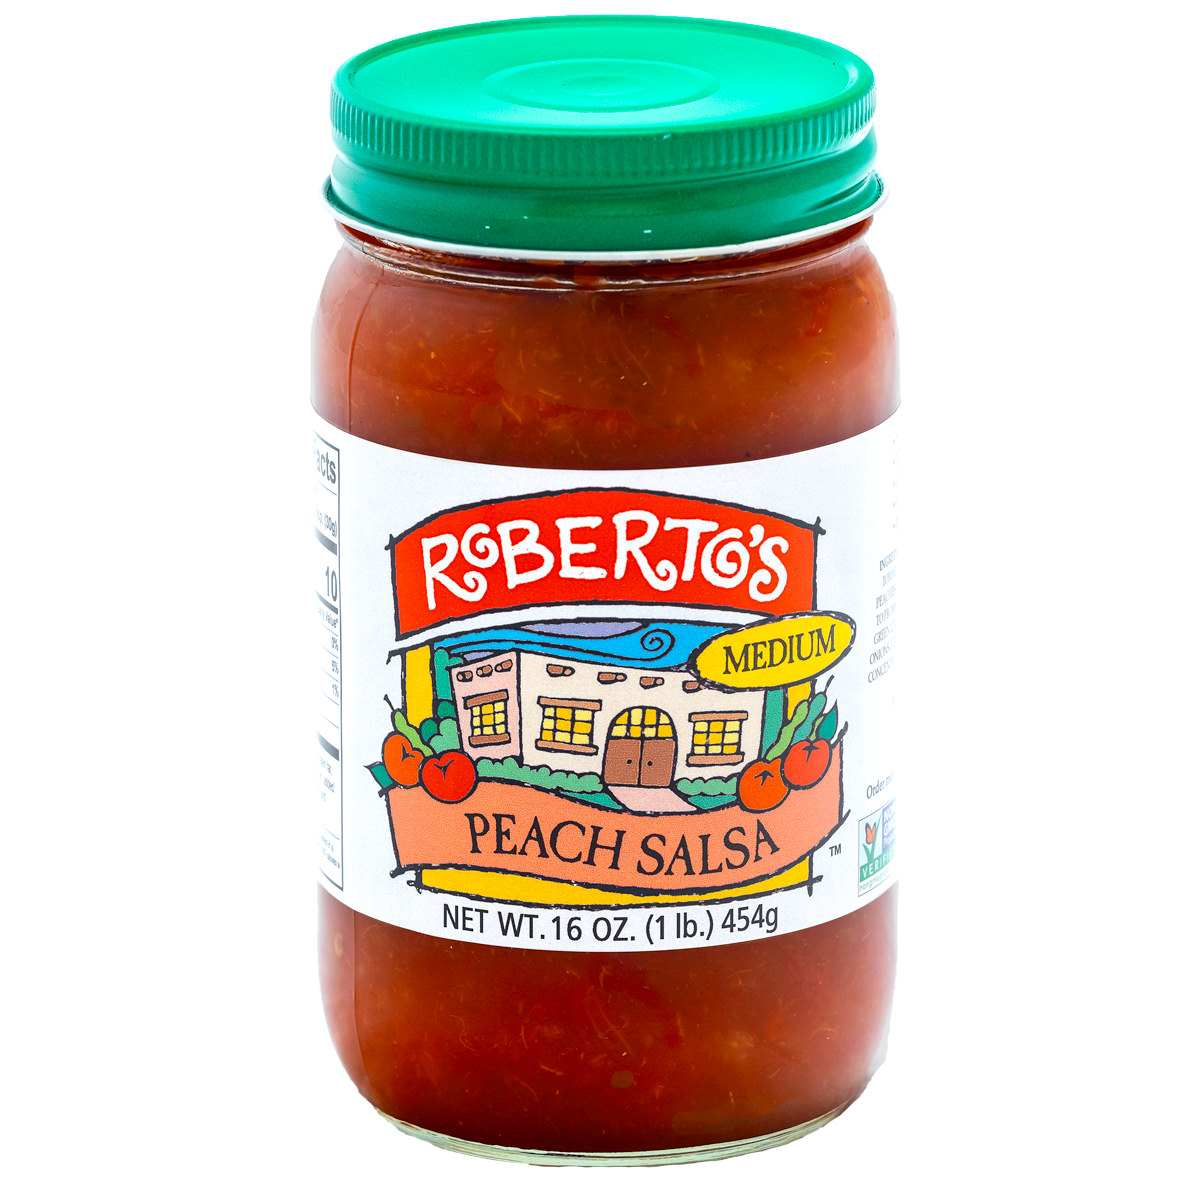 The homemade organic Roberto's peach salsa is made in the high rocky mountains with fresh peaches. It is medium spicy but fruity and sweet. The perfect balance. 8 or 16 ounce jar.